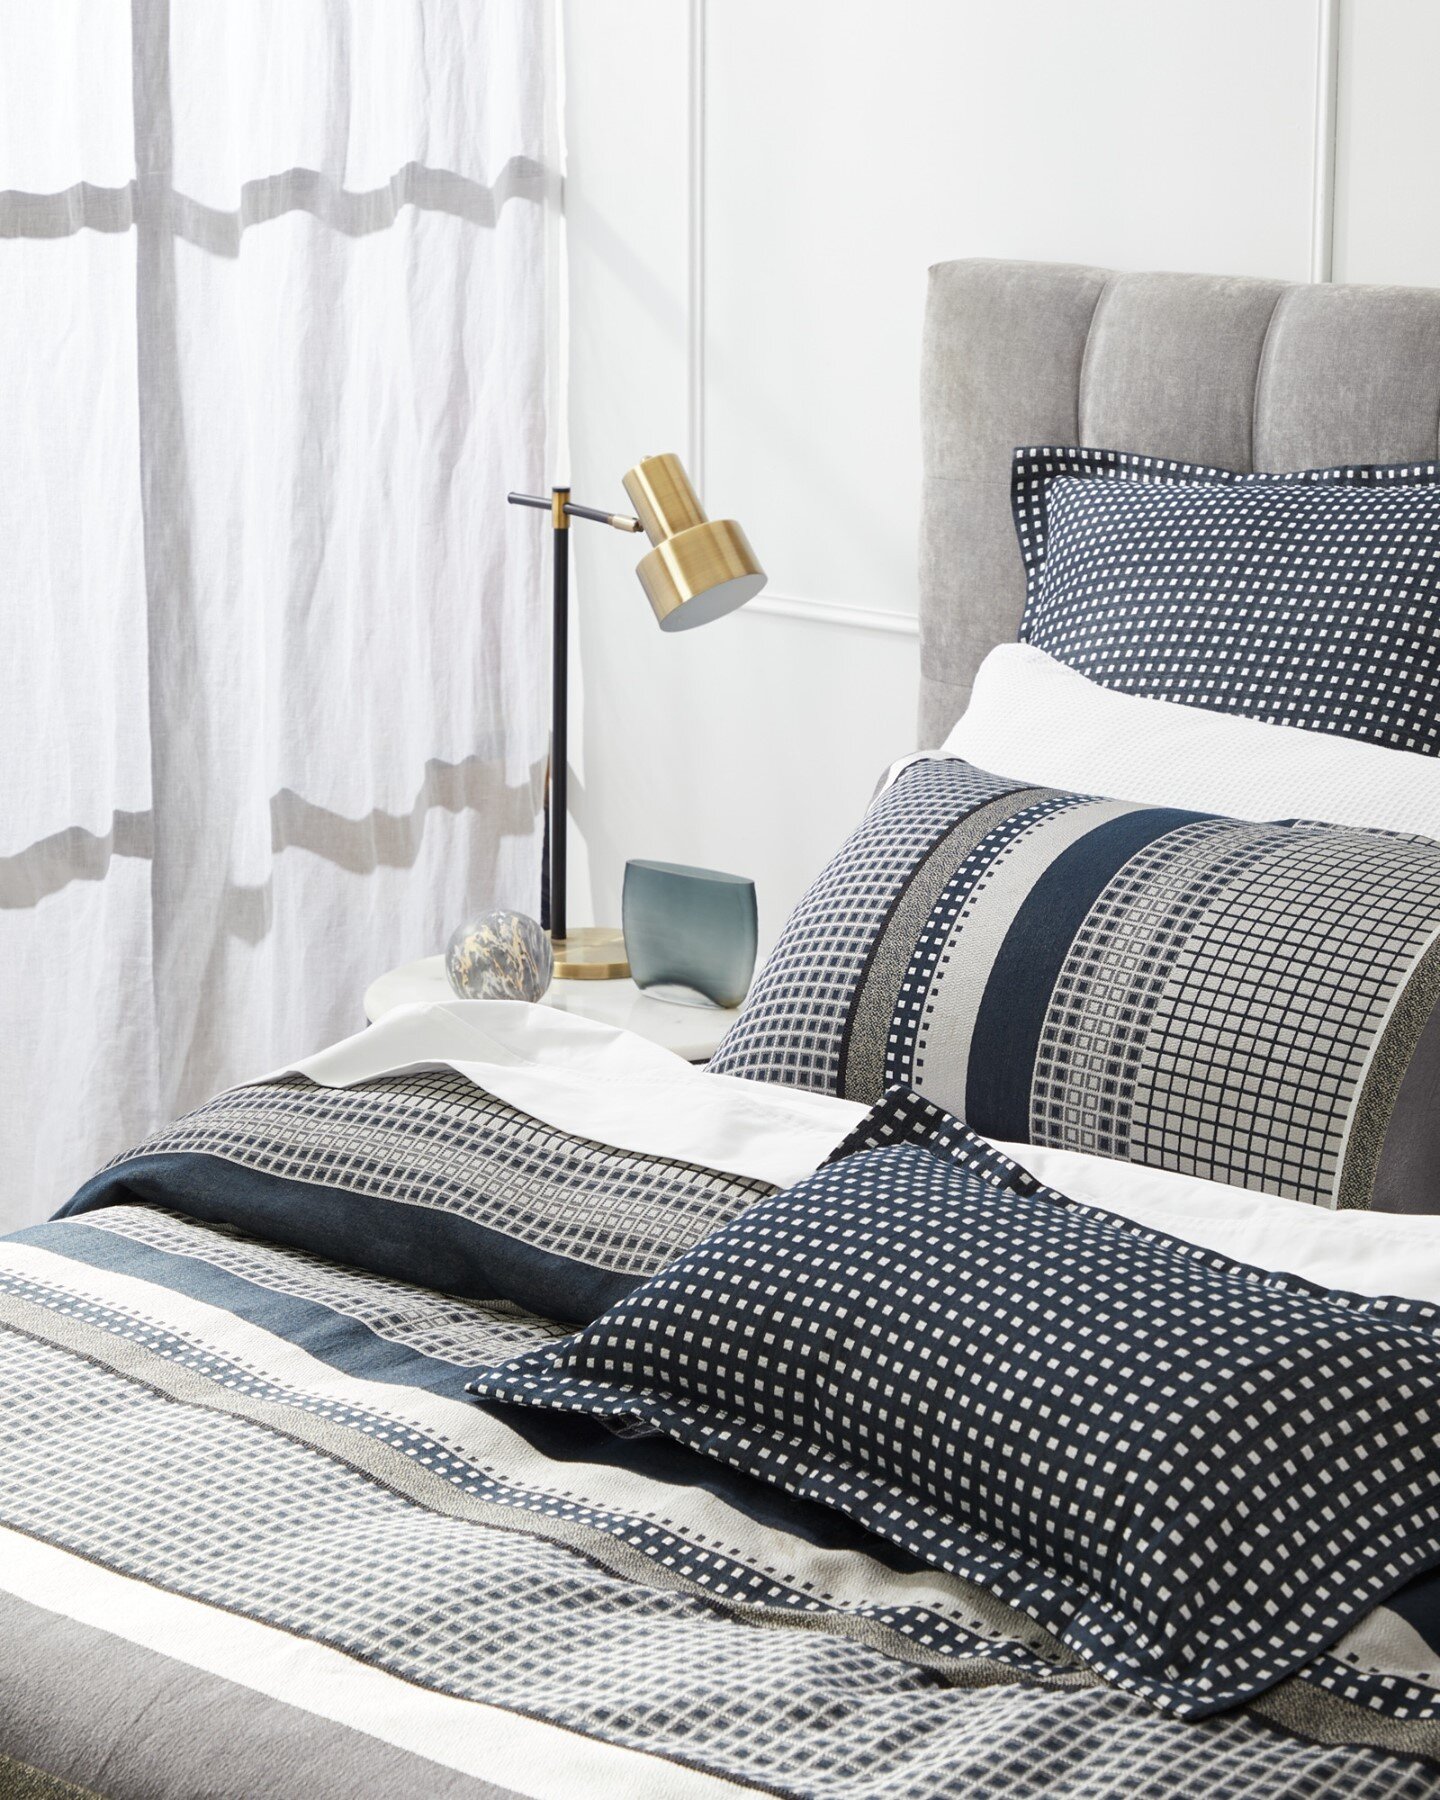 London Ink showcases our affinity with geometric patterns, structured lines and shapes, to create refined yet lively designs. ⁠
⁠
Something for your master bedroom?⁠
⁠
#London #myer